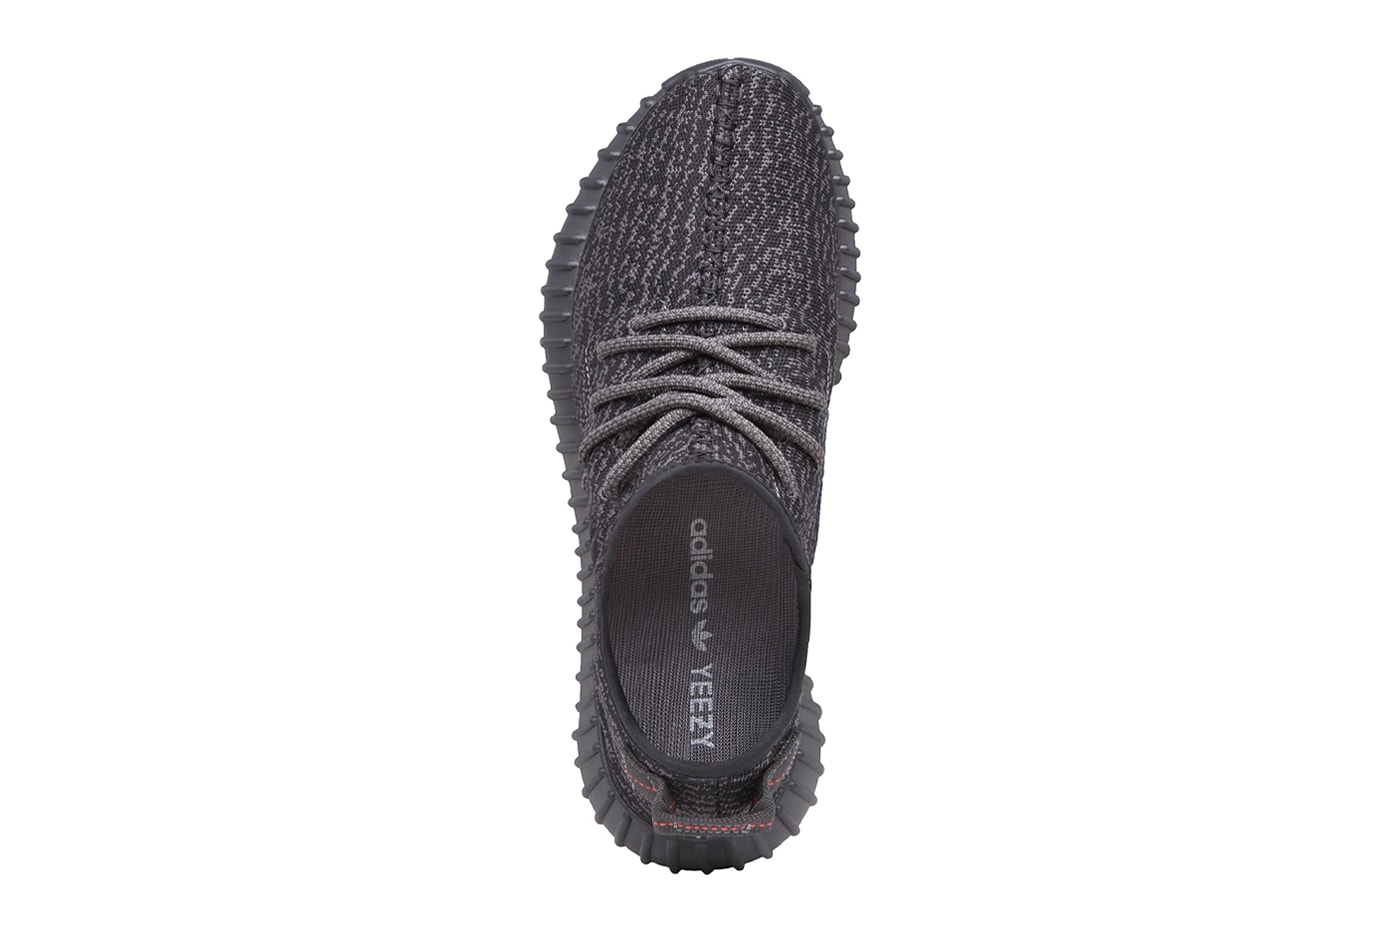 Culo maduro Colector adidas YEEZY BOOST 350 "Pirate Black" Receives a Release Date | Hypebeast